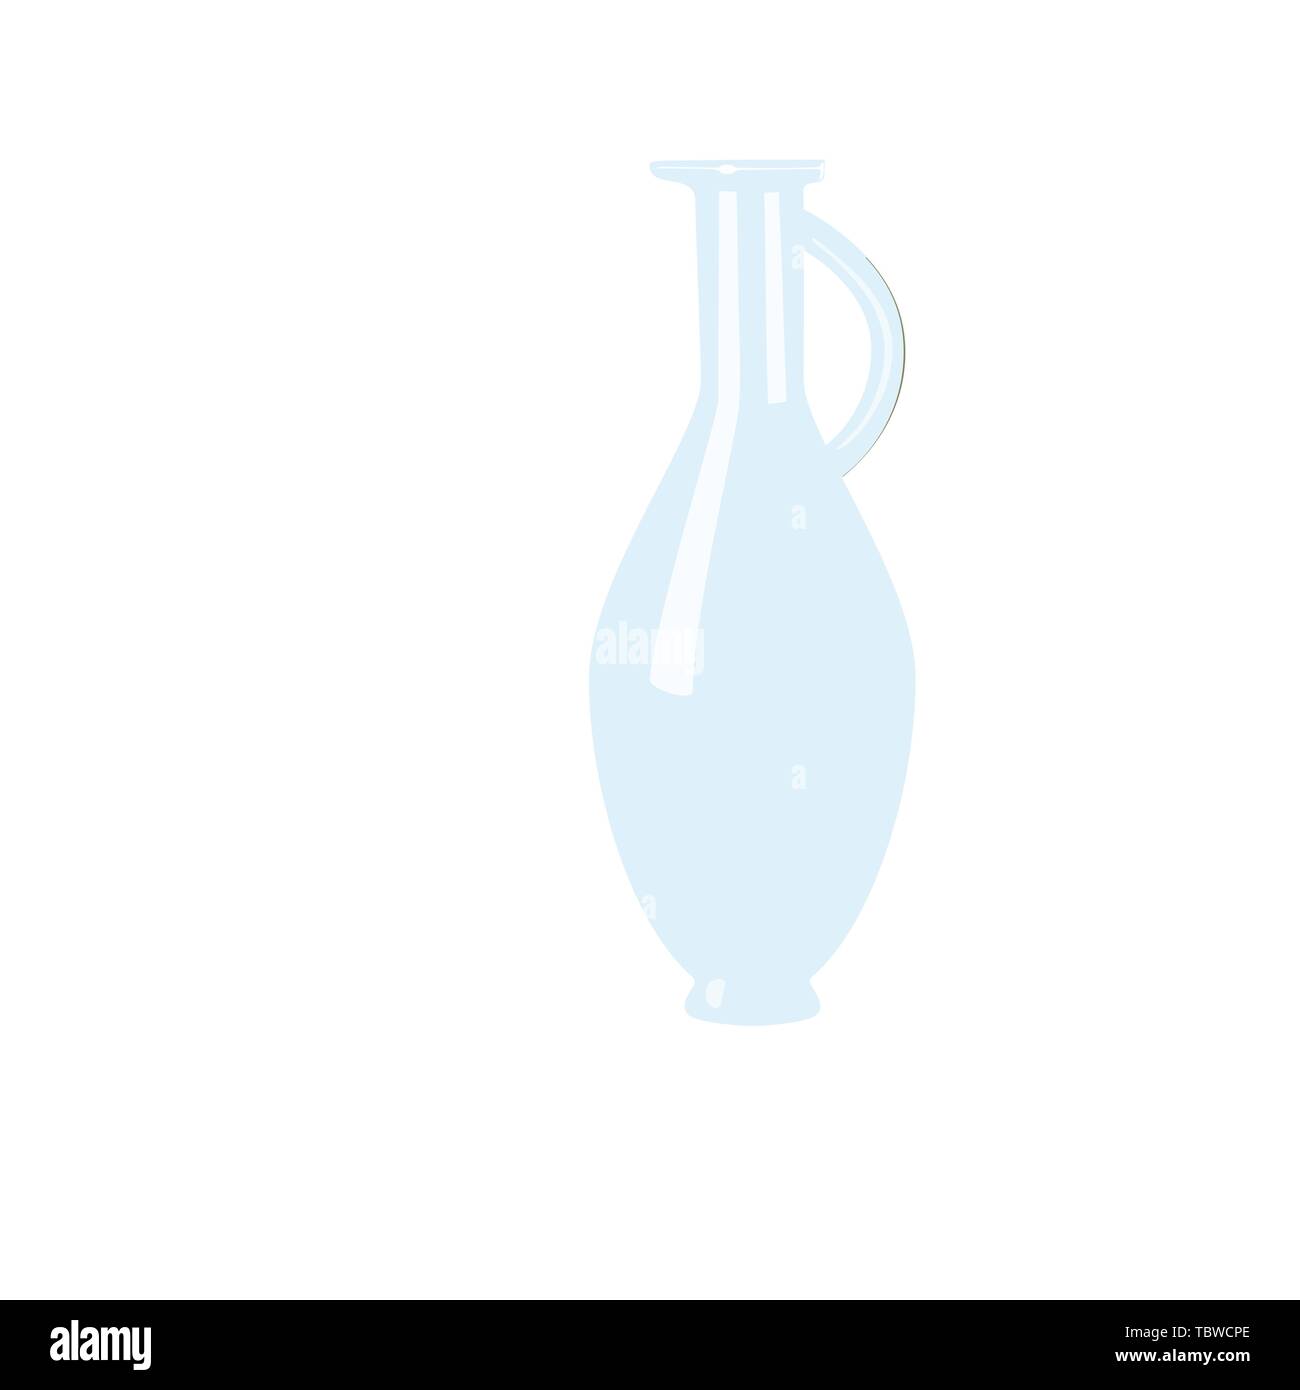 Glass empty flagon with handle. tranparent icy-white decanter on white background. Flask for juice, wine, beer, spirits, oil, alcohol, jar, beverages. Stock Vector